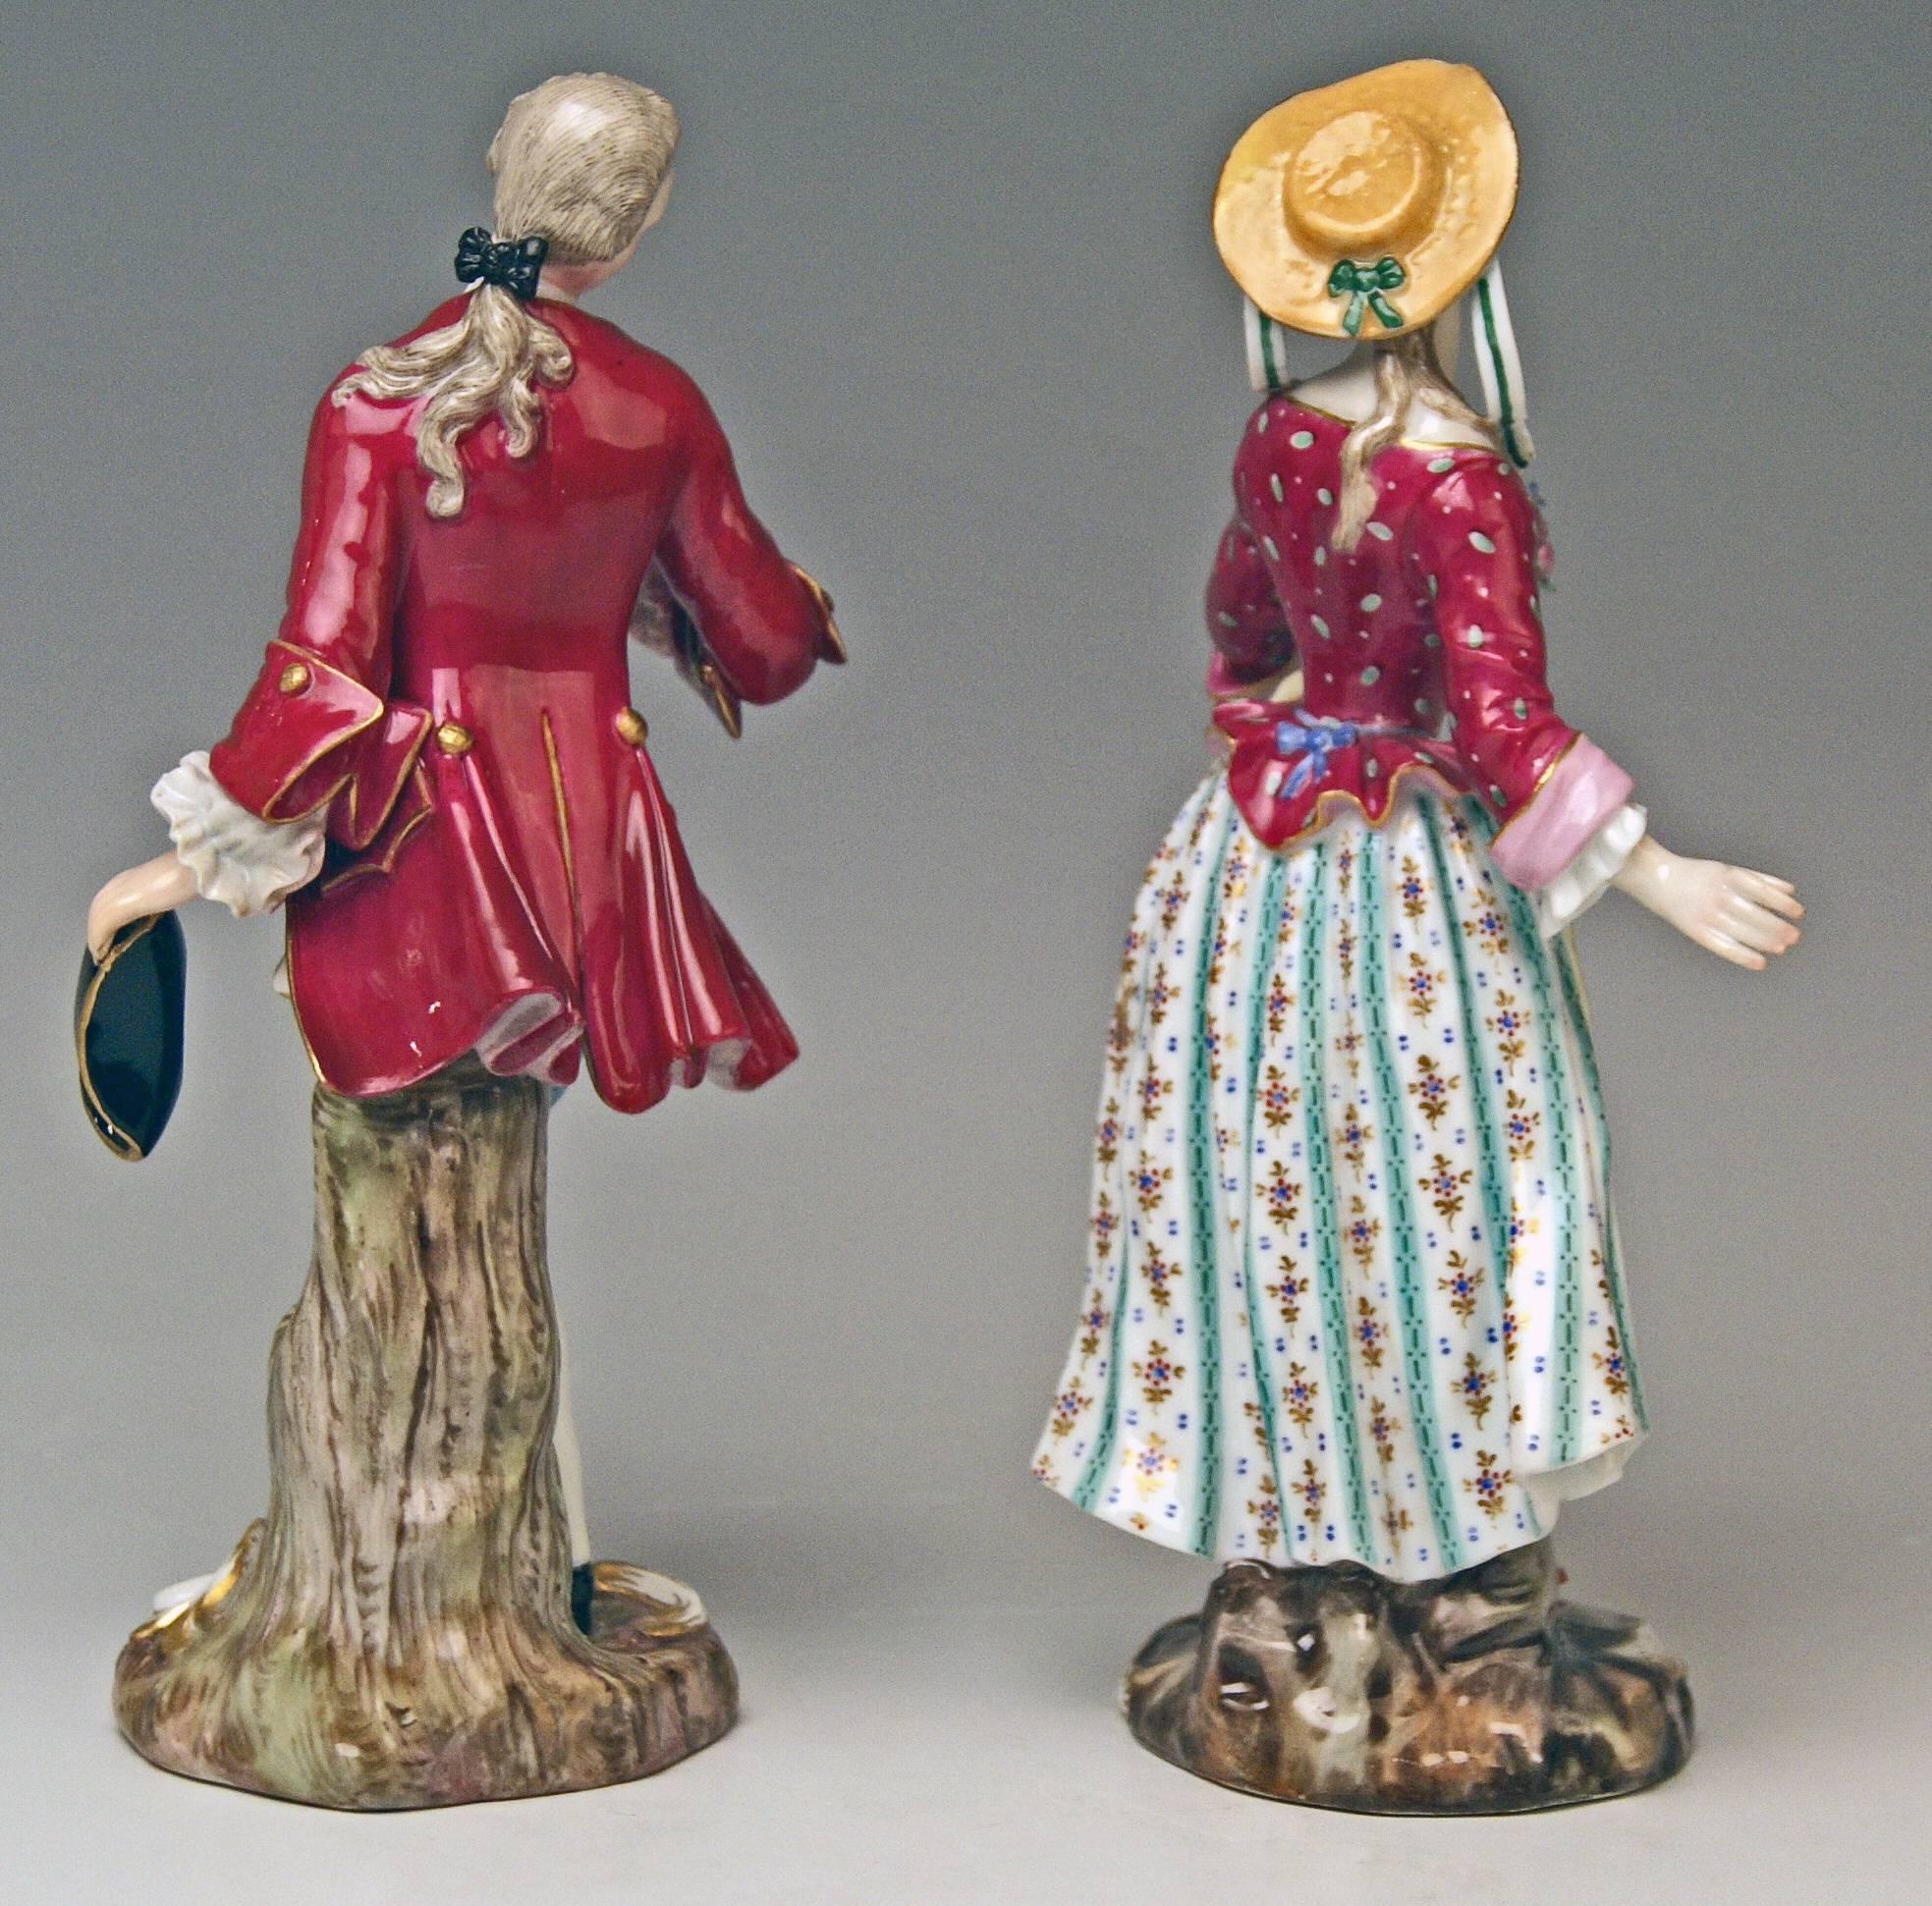 old man and woman porcelain figurines